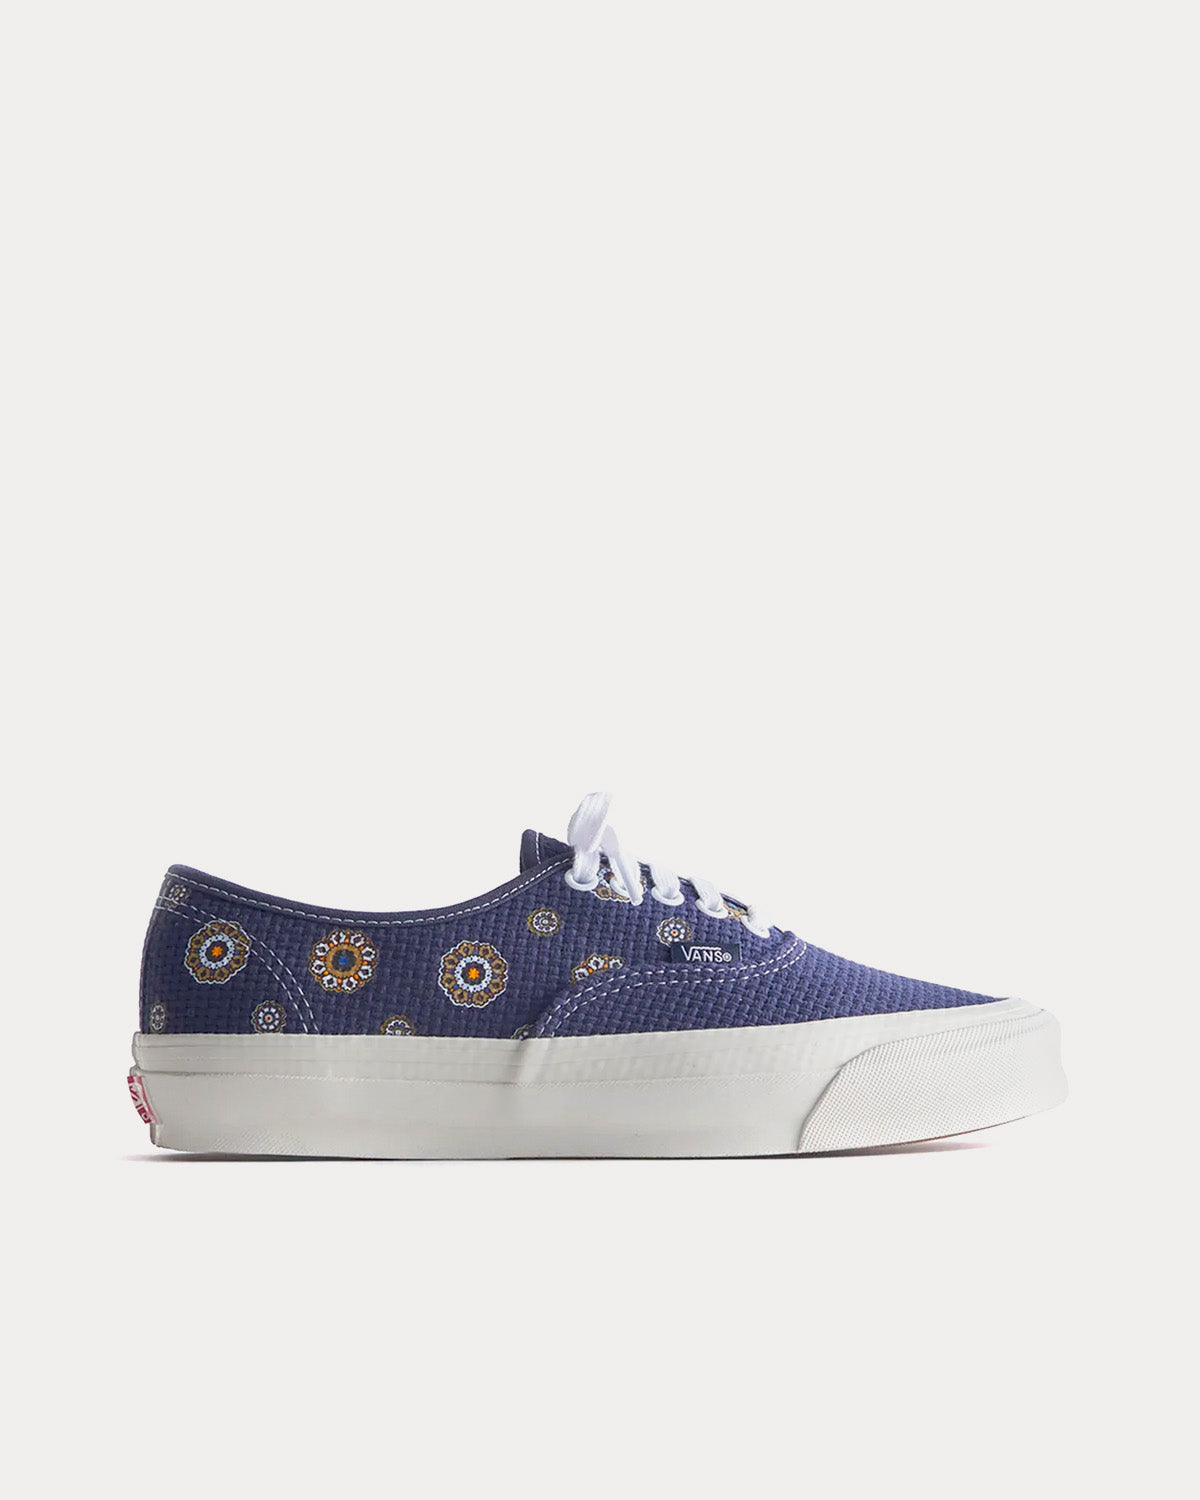 Vans x Kith - Medallion OG Authentic LX Navy Blazer Low Top Sneakers